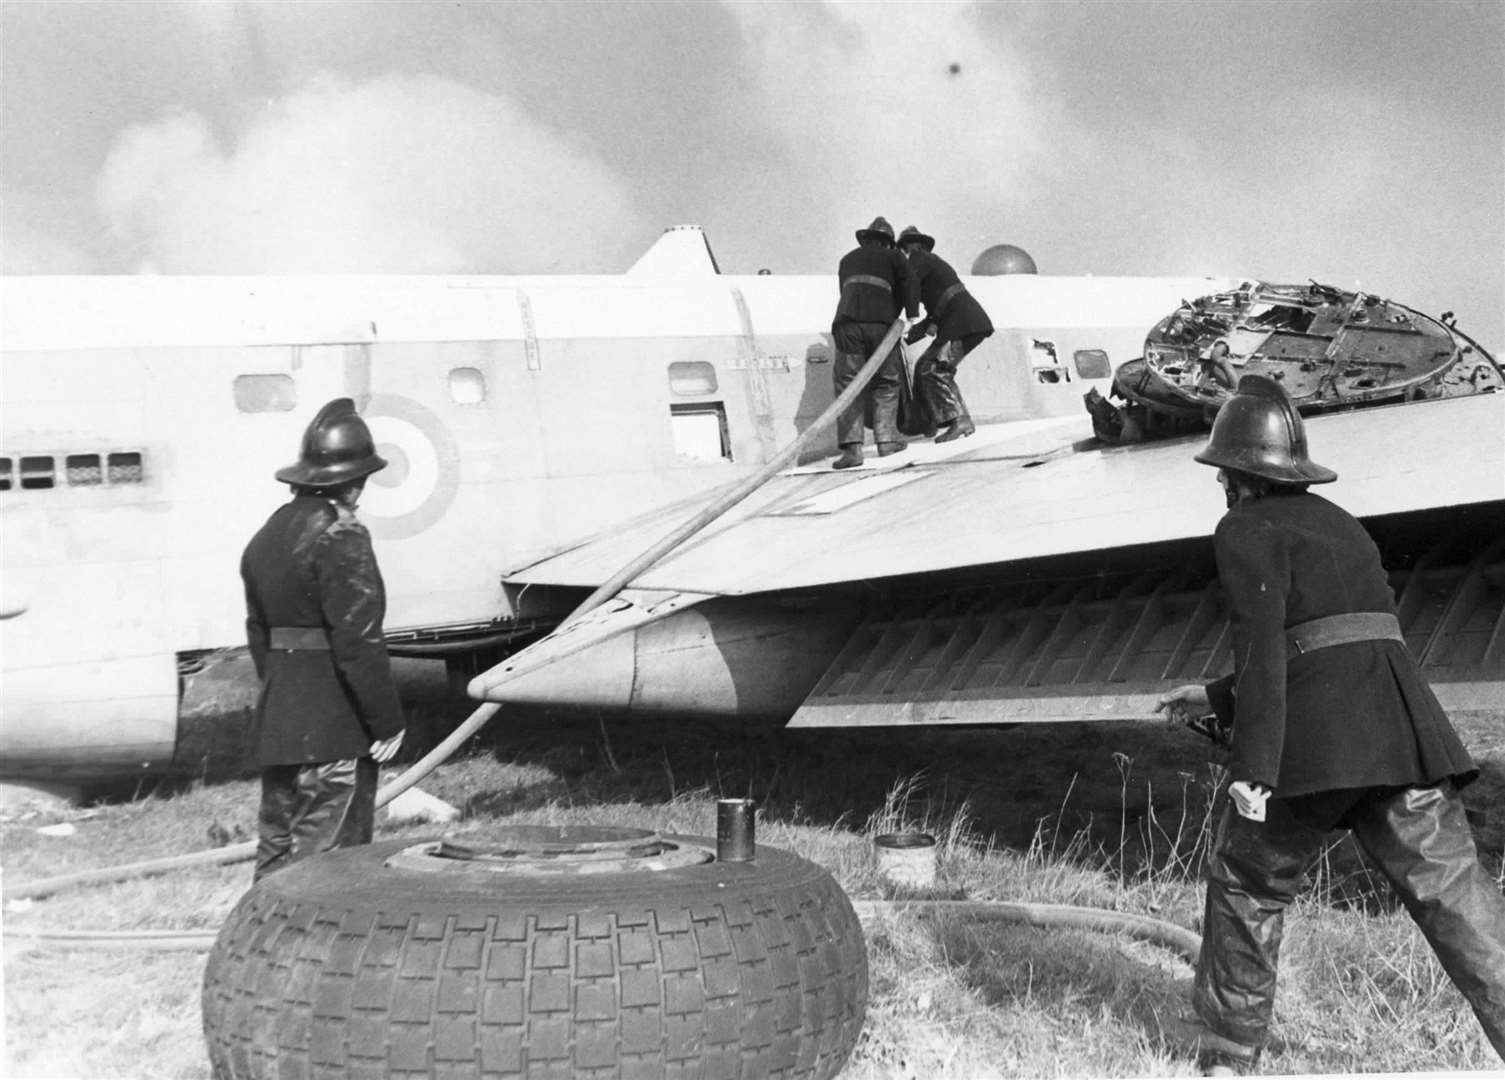 RAF firefighters at Manston Airport in 1973